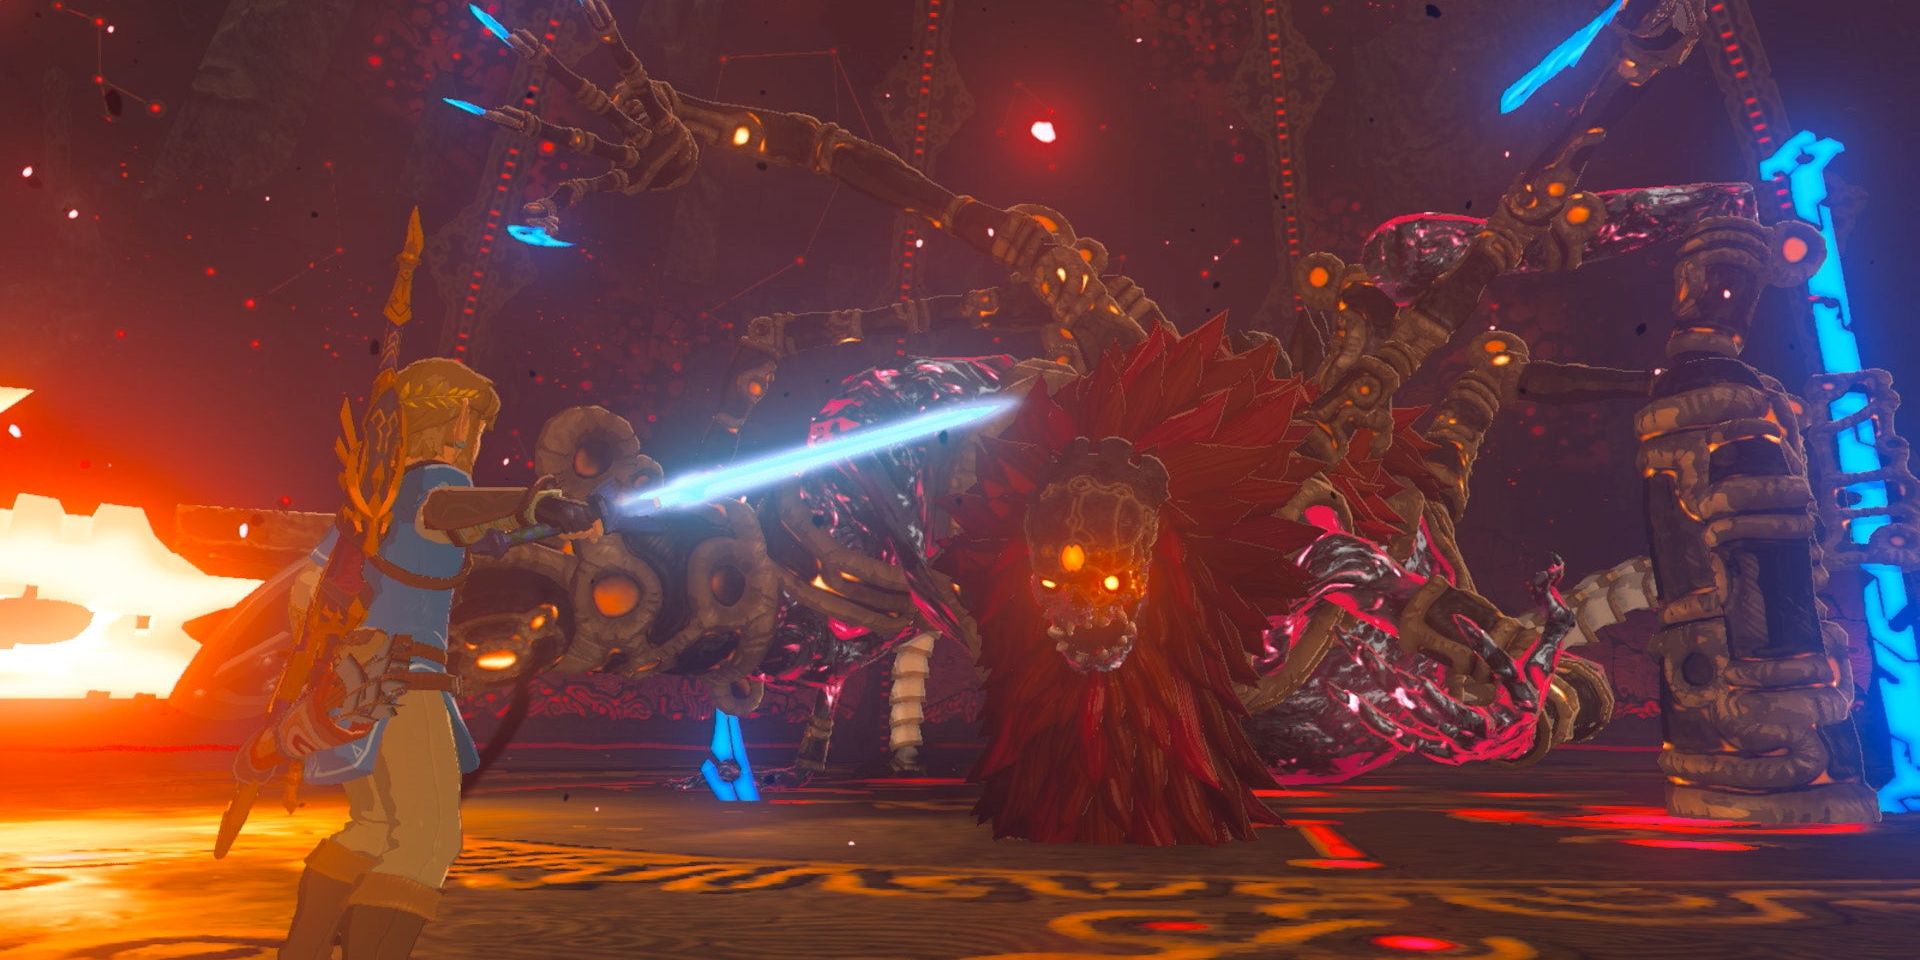 Link face-to-face with Calamity Ganon in The Legend of Zelda Breath of the Wild